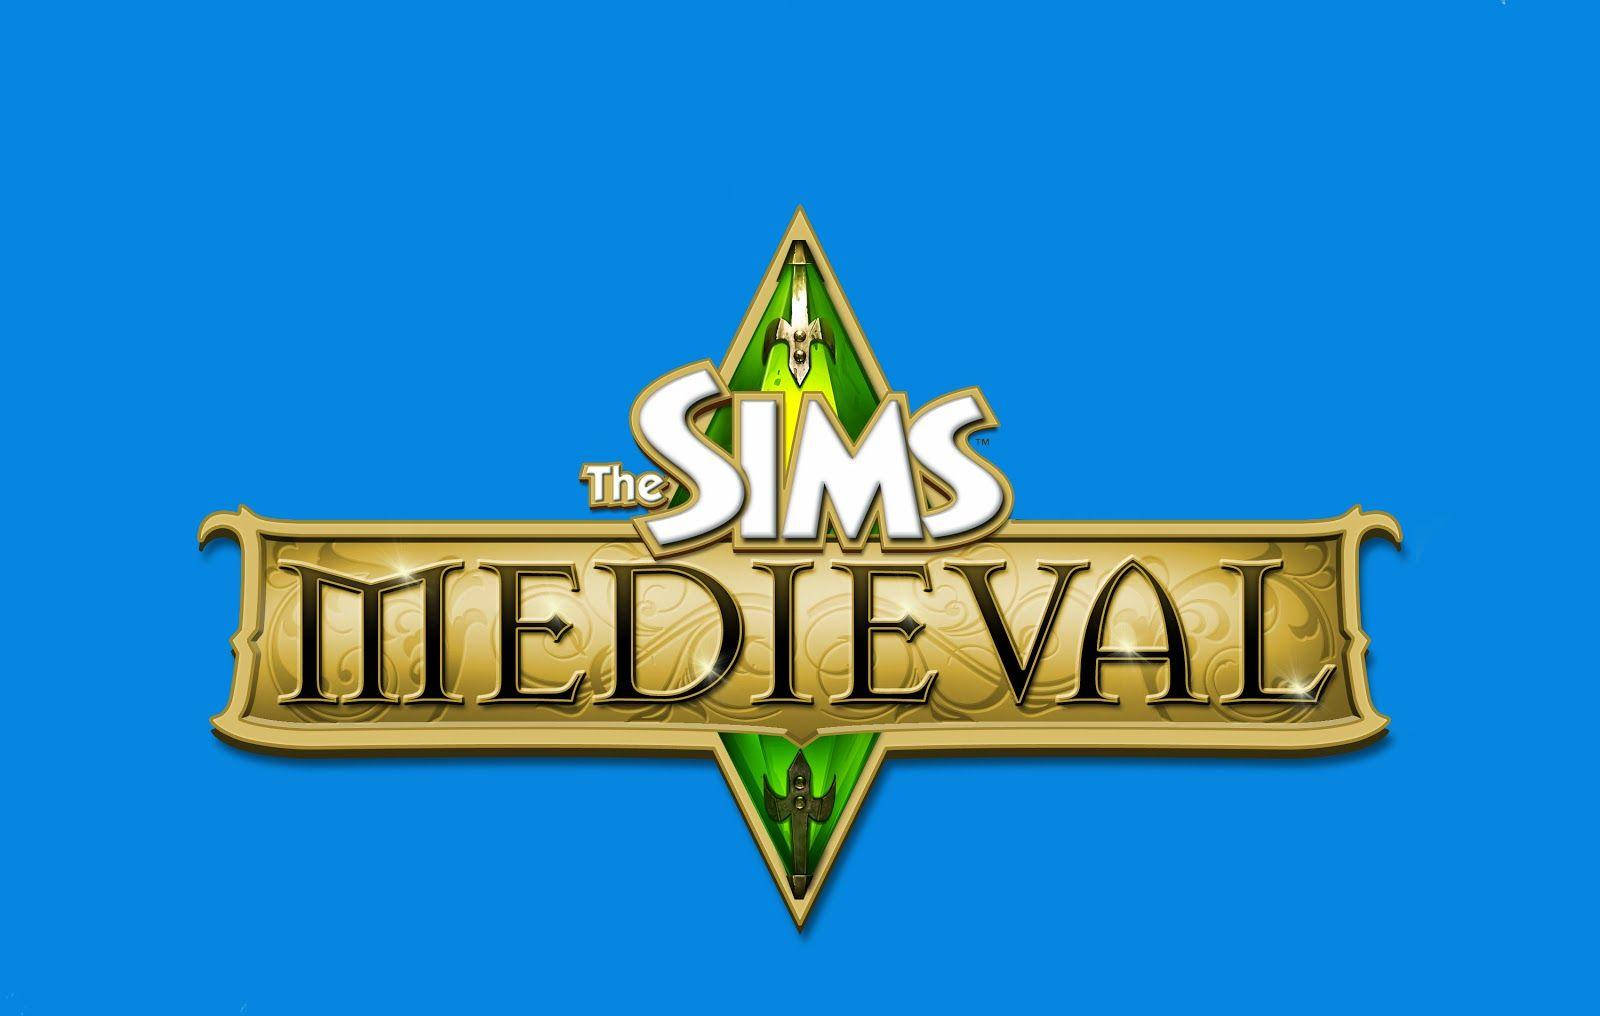 The Sims Medieval Logo